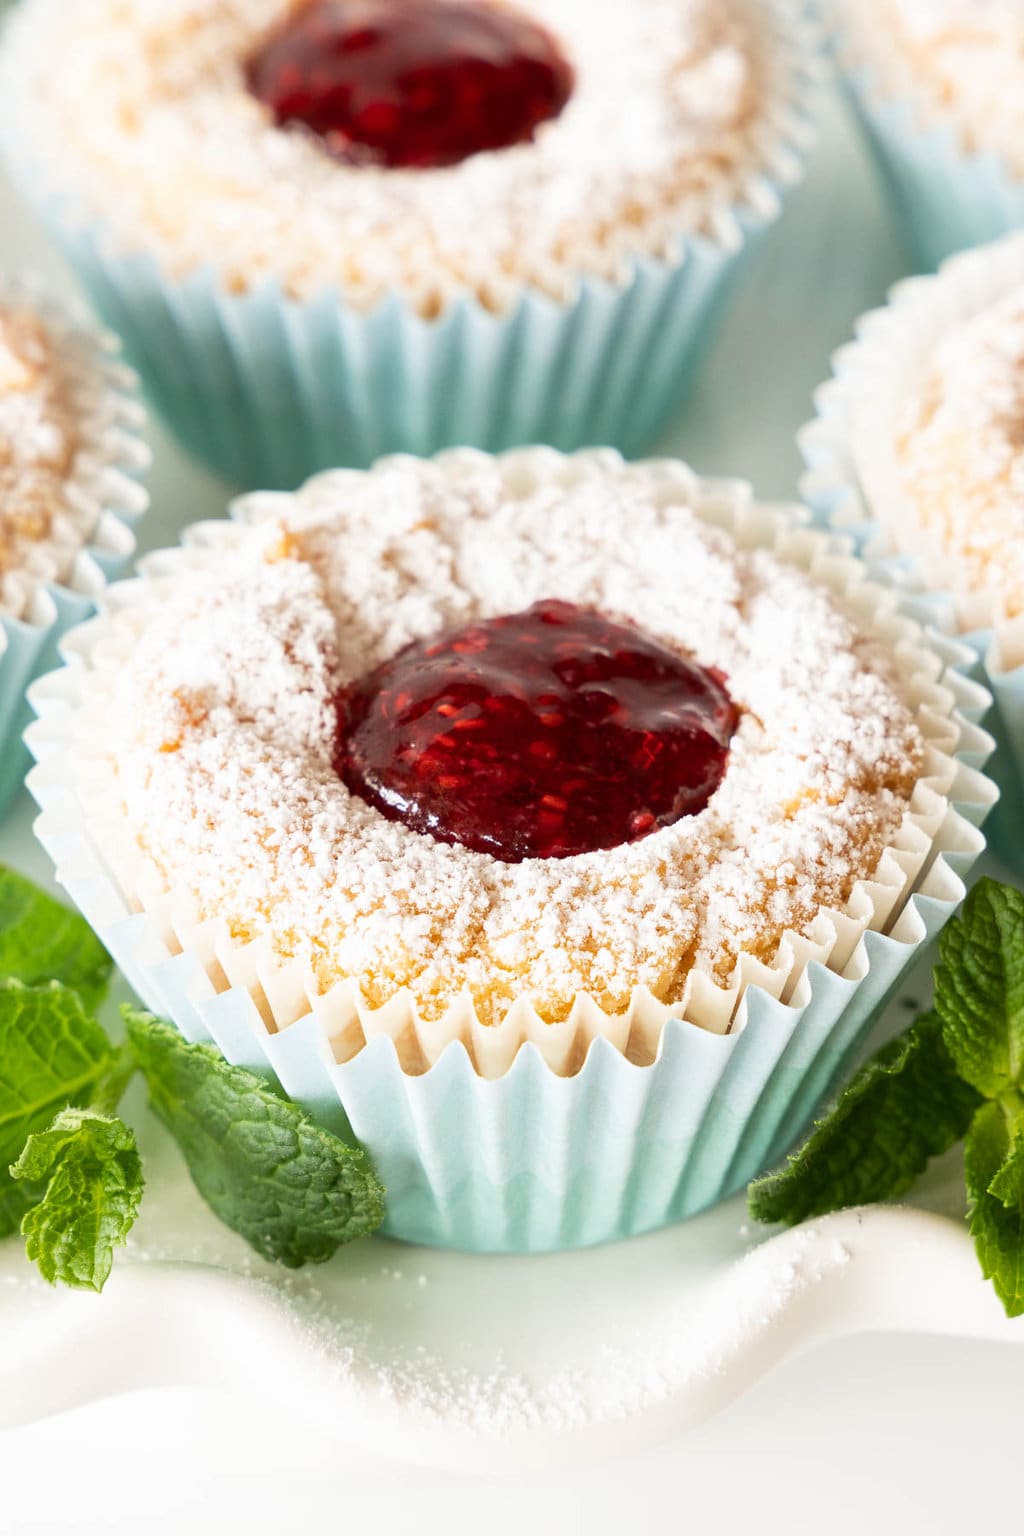 Vertical extreme closeup photo of Ridiculously Easy Scandinavian Raspberry Jam Tarts sprinkled with powdered sugar on a scalloped white serving plate.